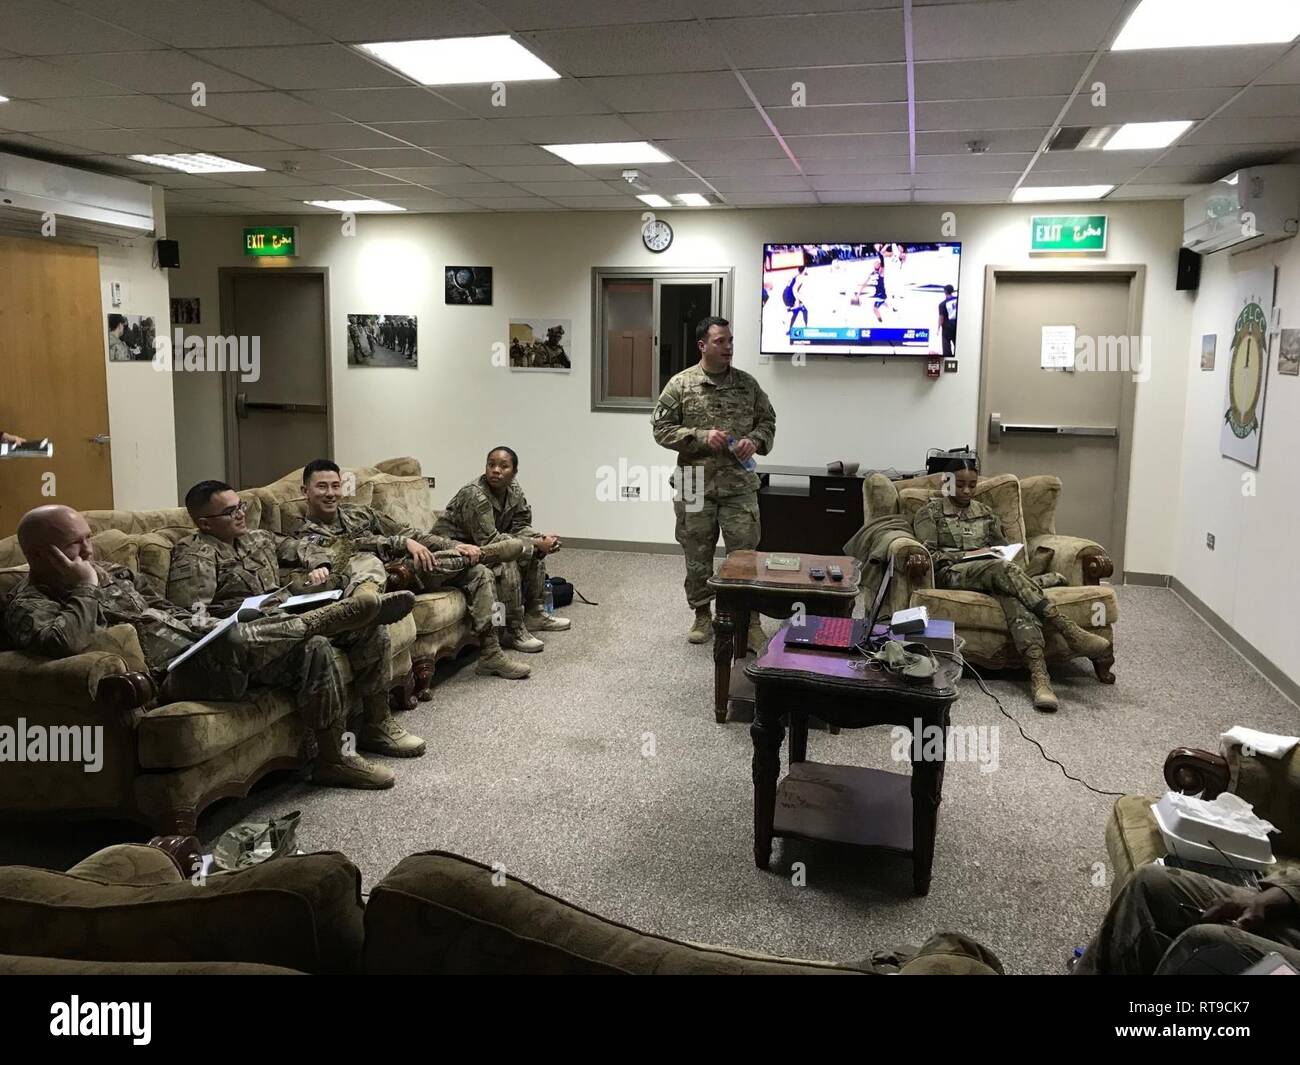 Lt. Col. Leopold Karanikolas, 420th Transportation Battalion commander, conducts an officer professional development (OPD) session to all of his officers in the battalion at Camp Arifjan, Kuwait, Jan. 26, 2019.  The purpose of the OPD is to continue to develop the leaders in the battalion. Stock Photo